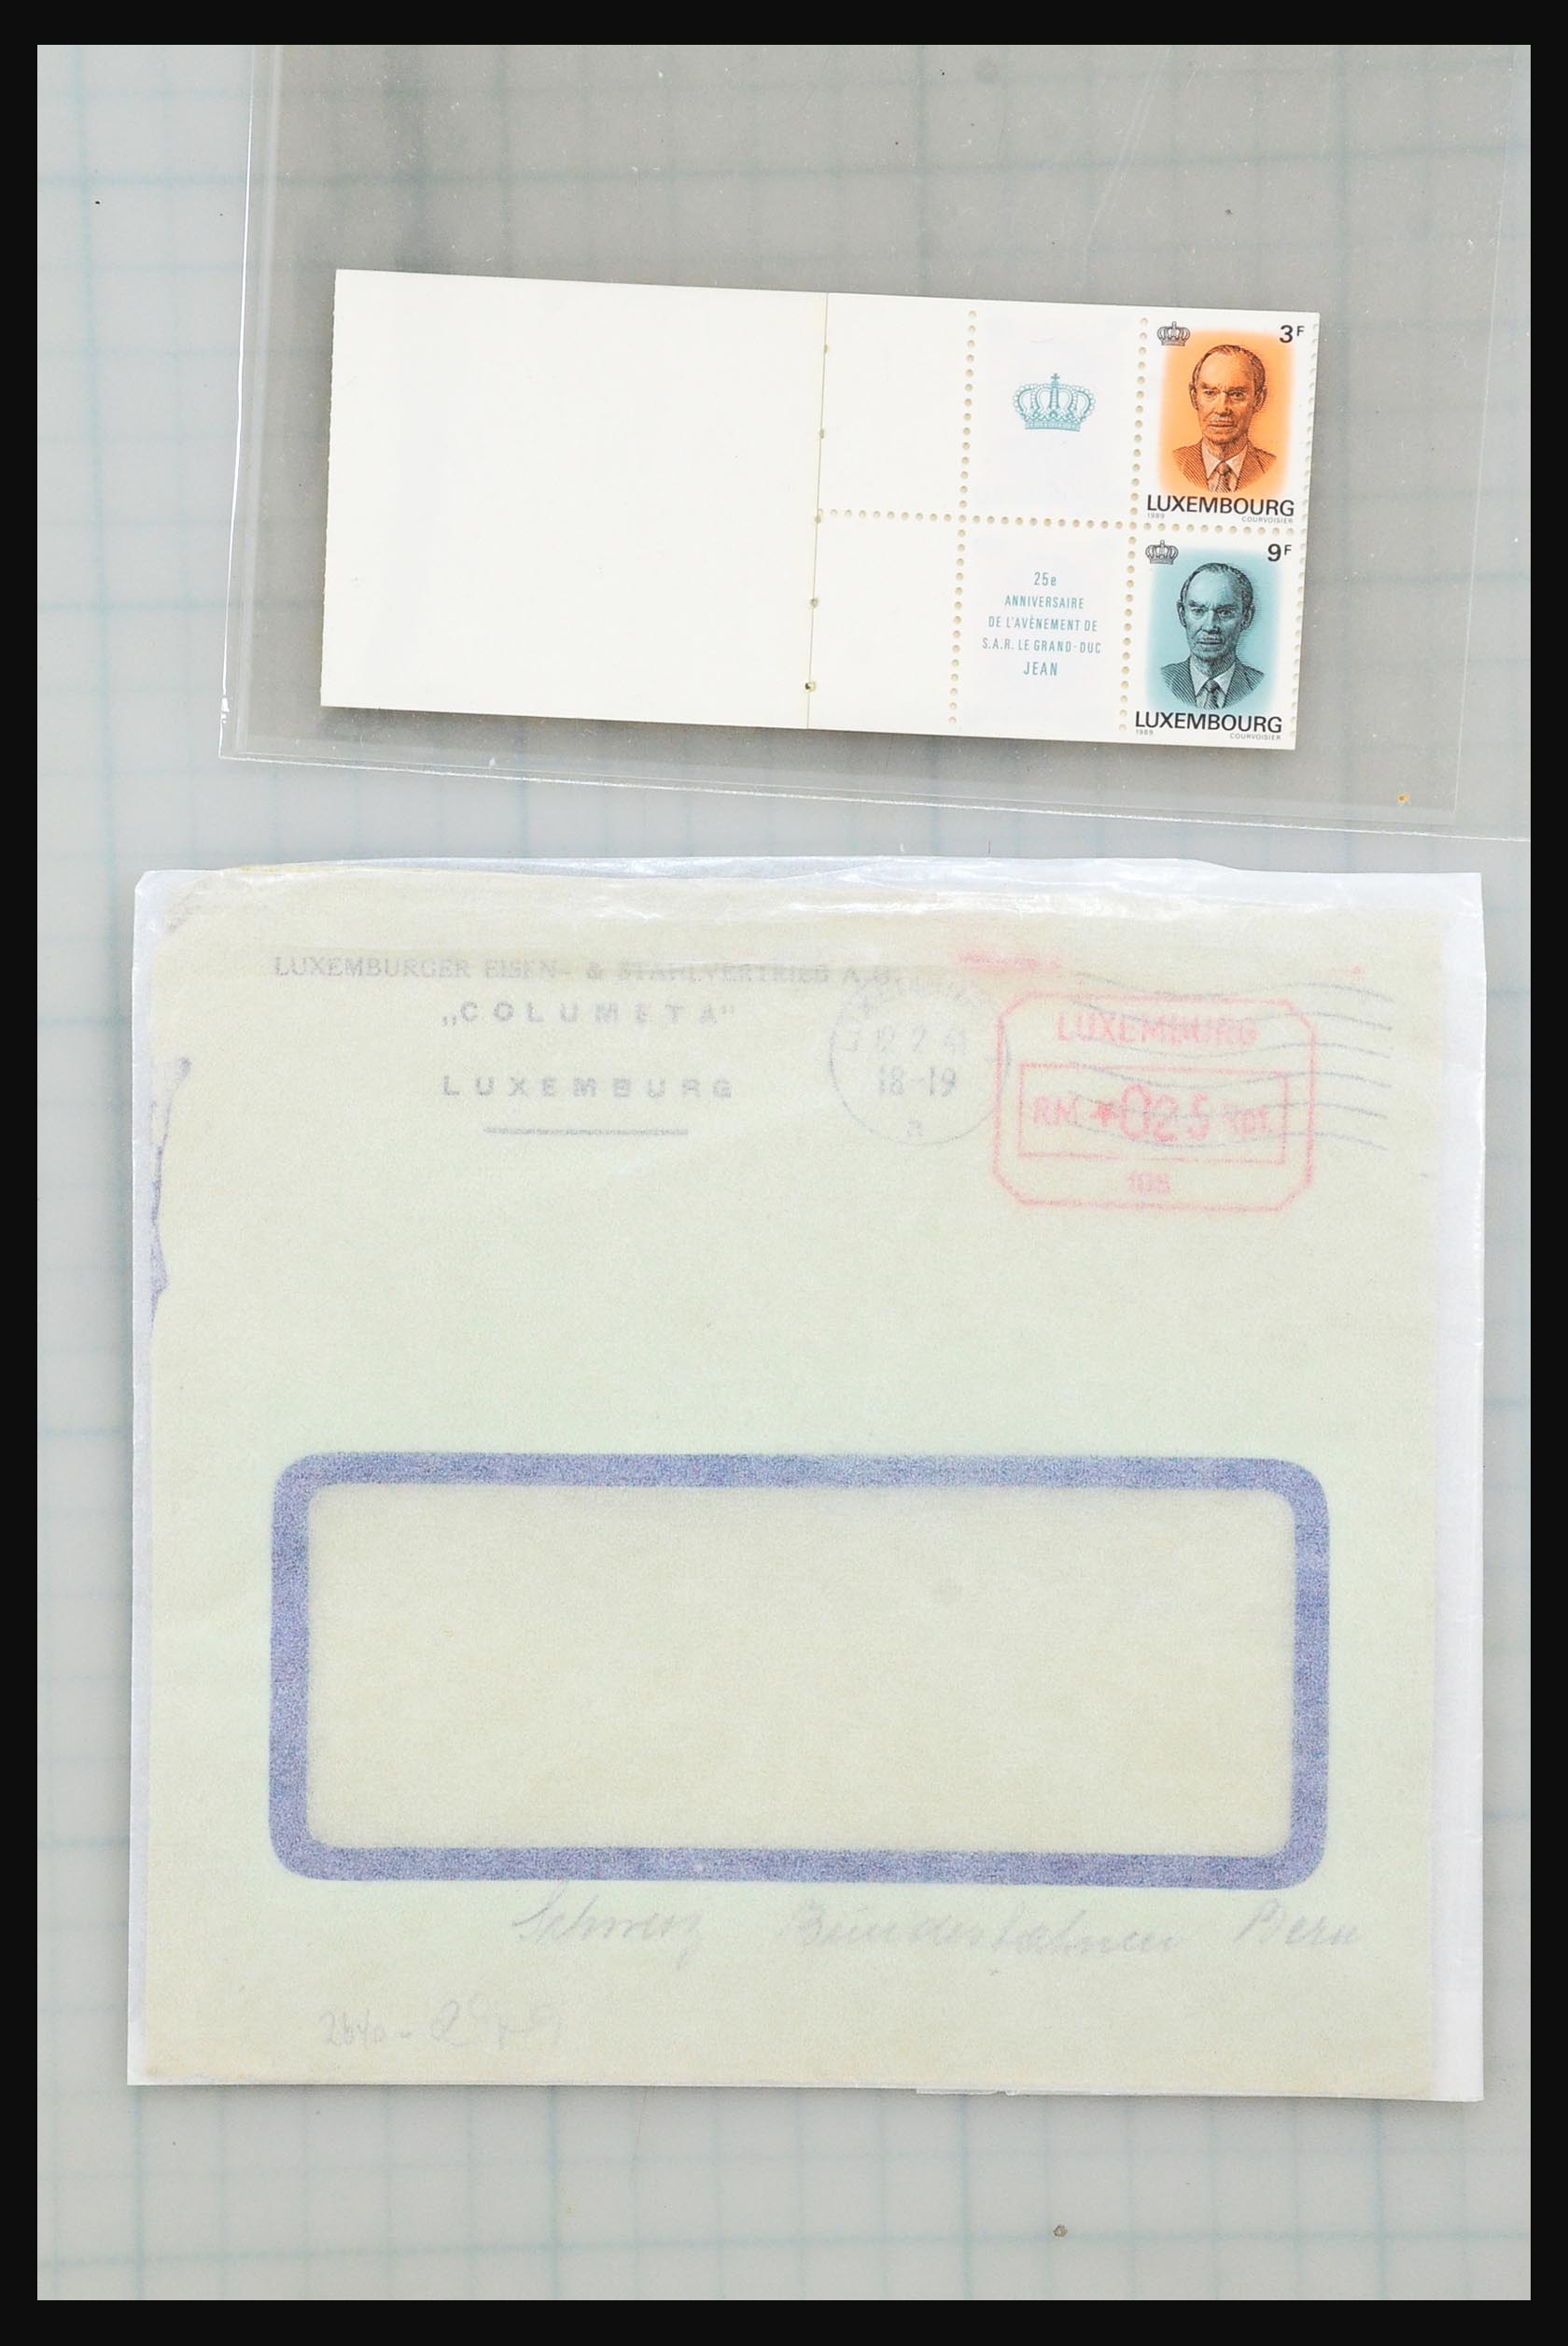 31358 039 - 31358 Portugal/Luxemburg/Greece covers 1880-1960.